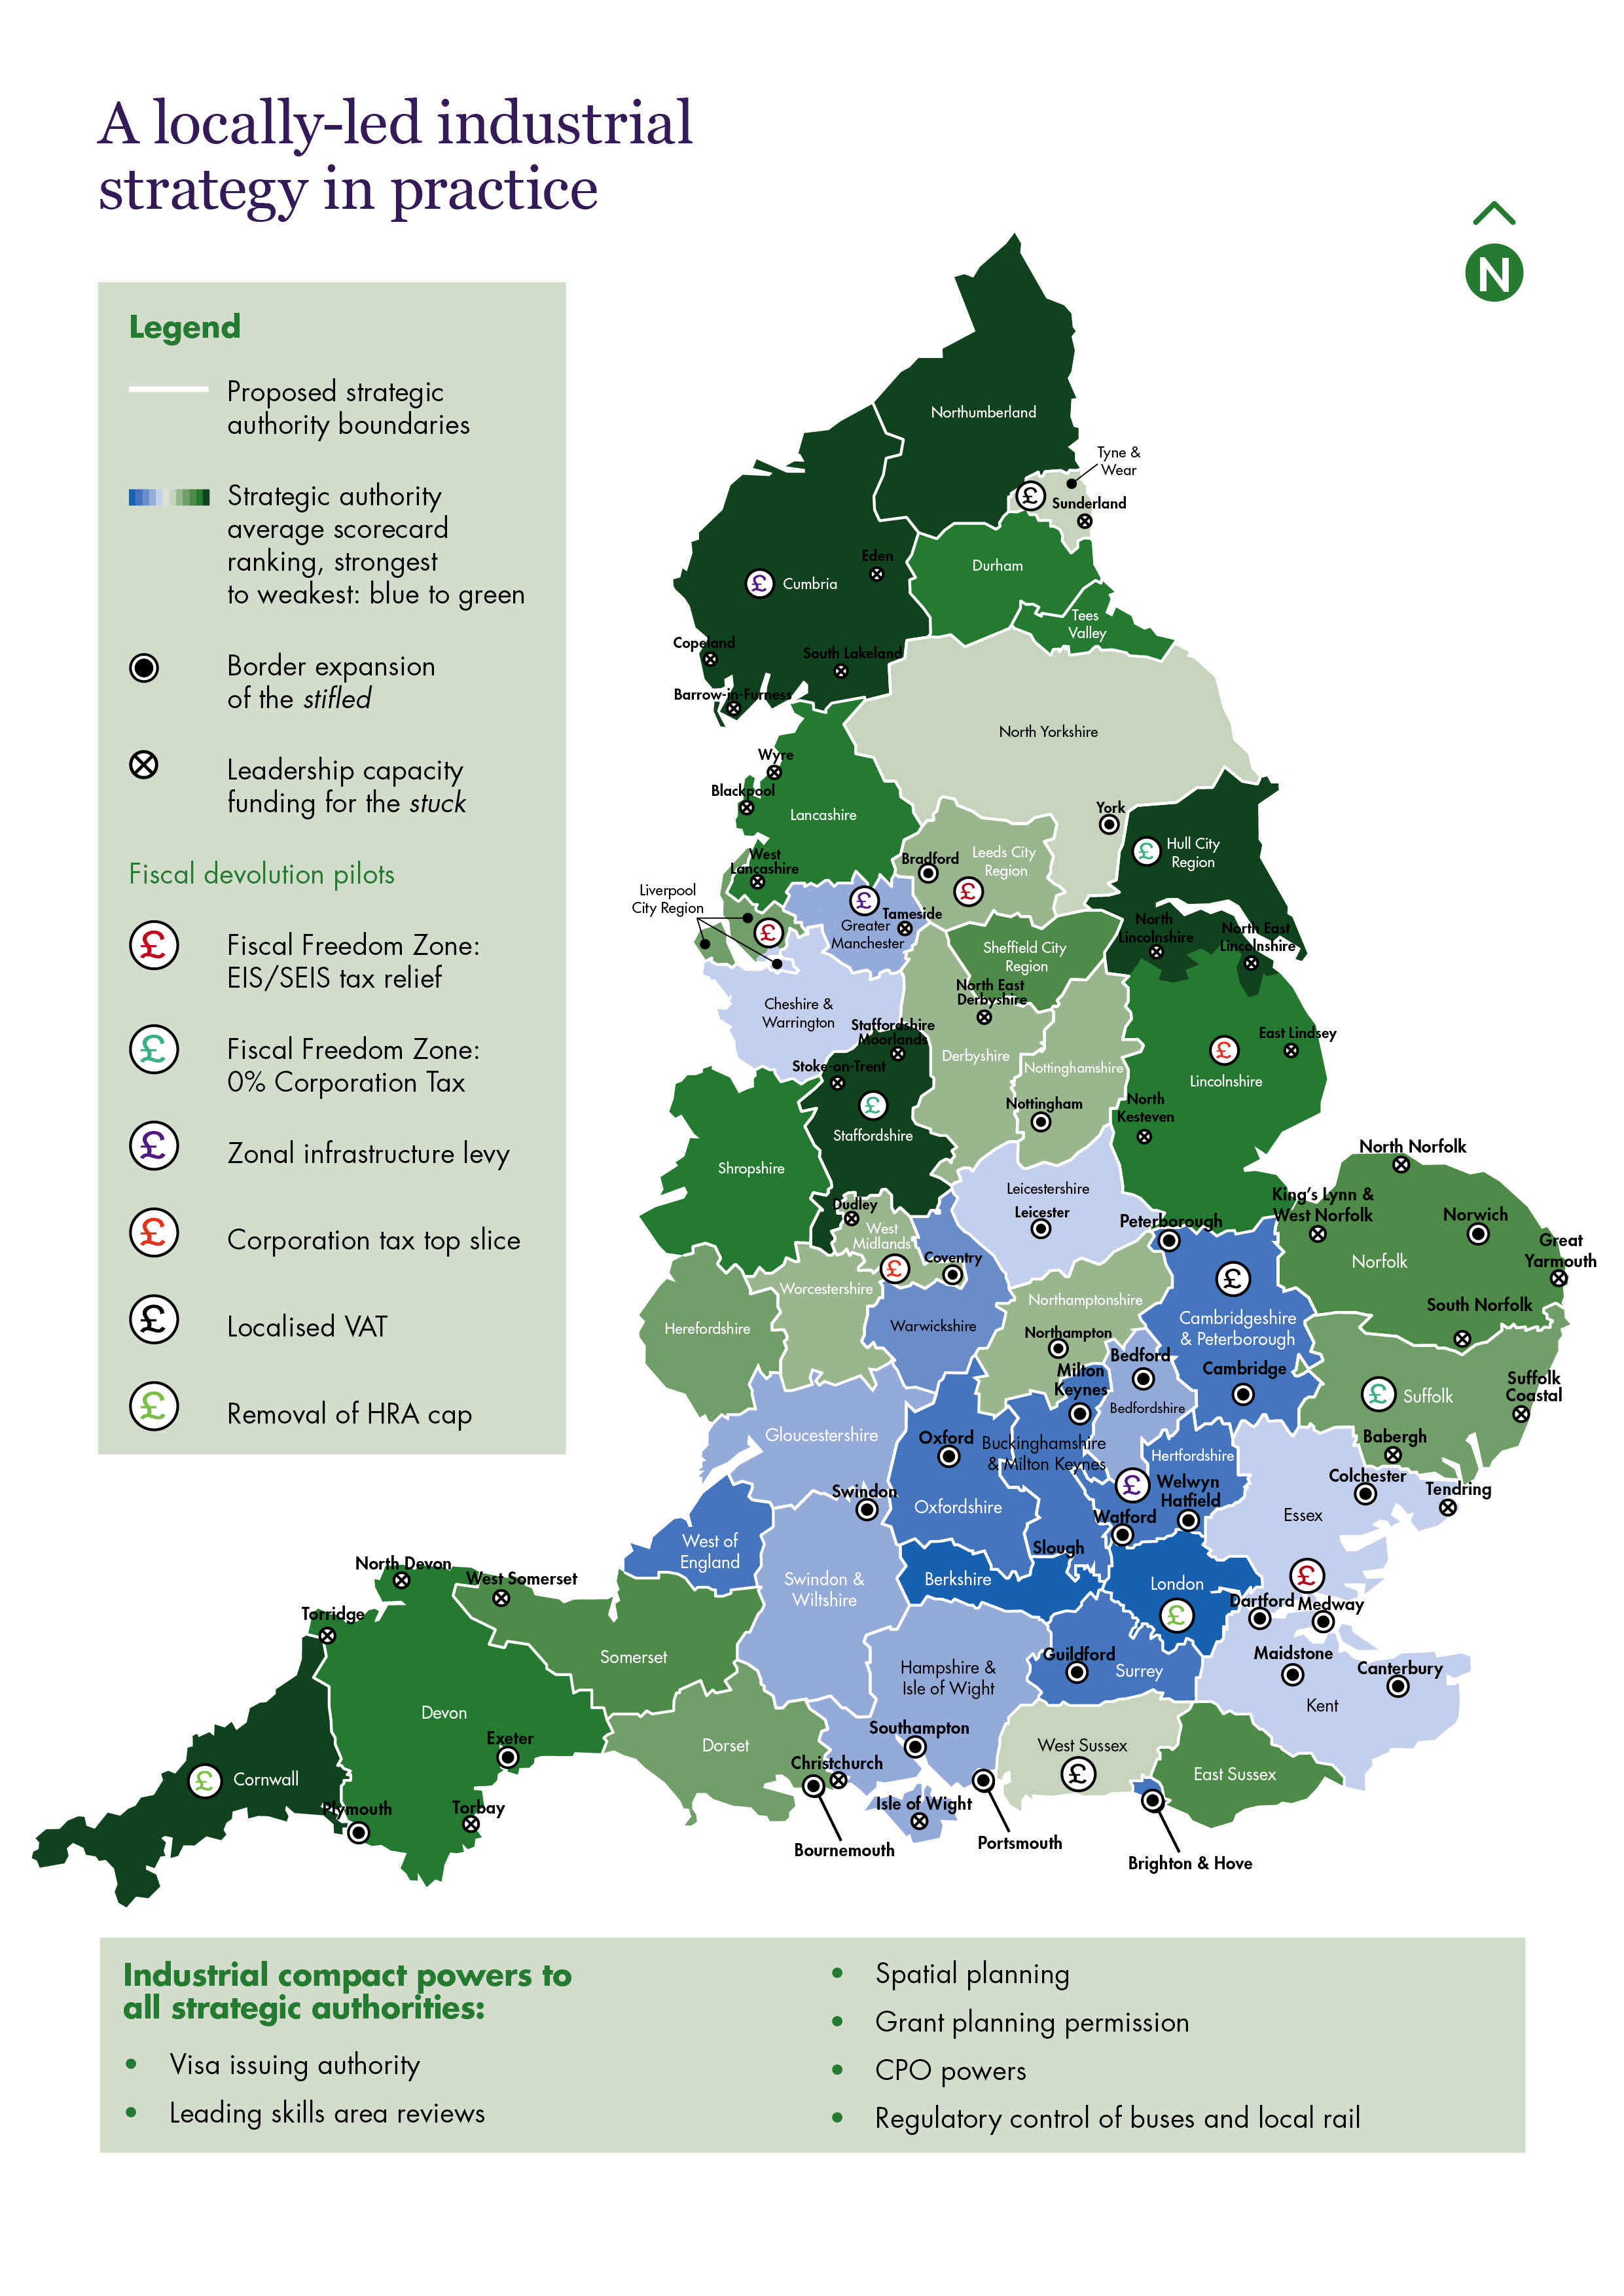 A4_IndustrialStrategy_Maps_Uncredited2